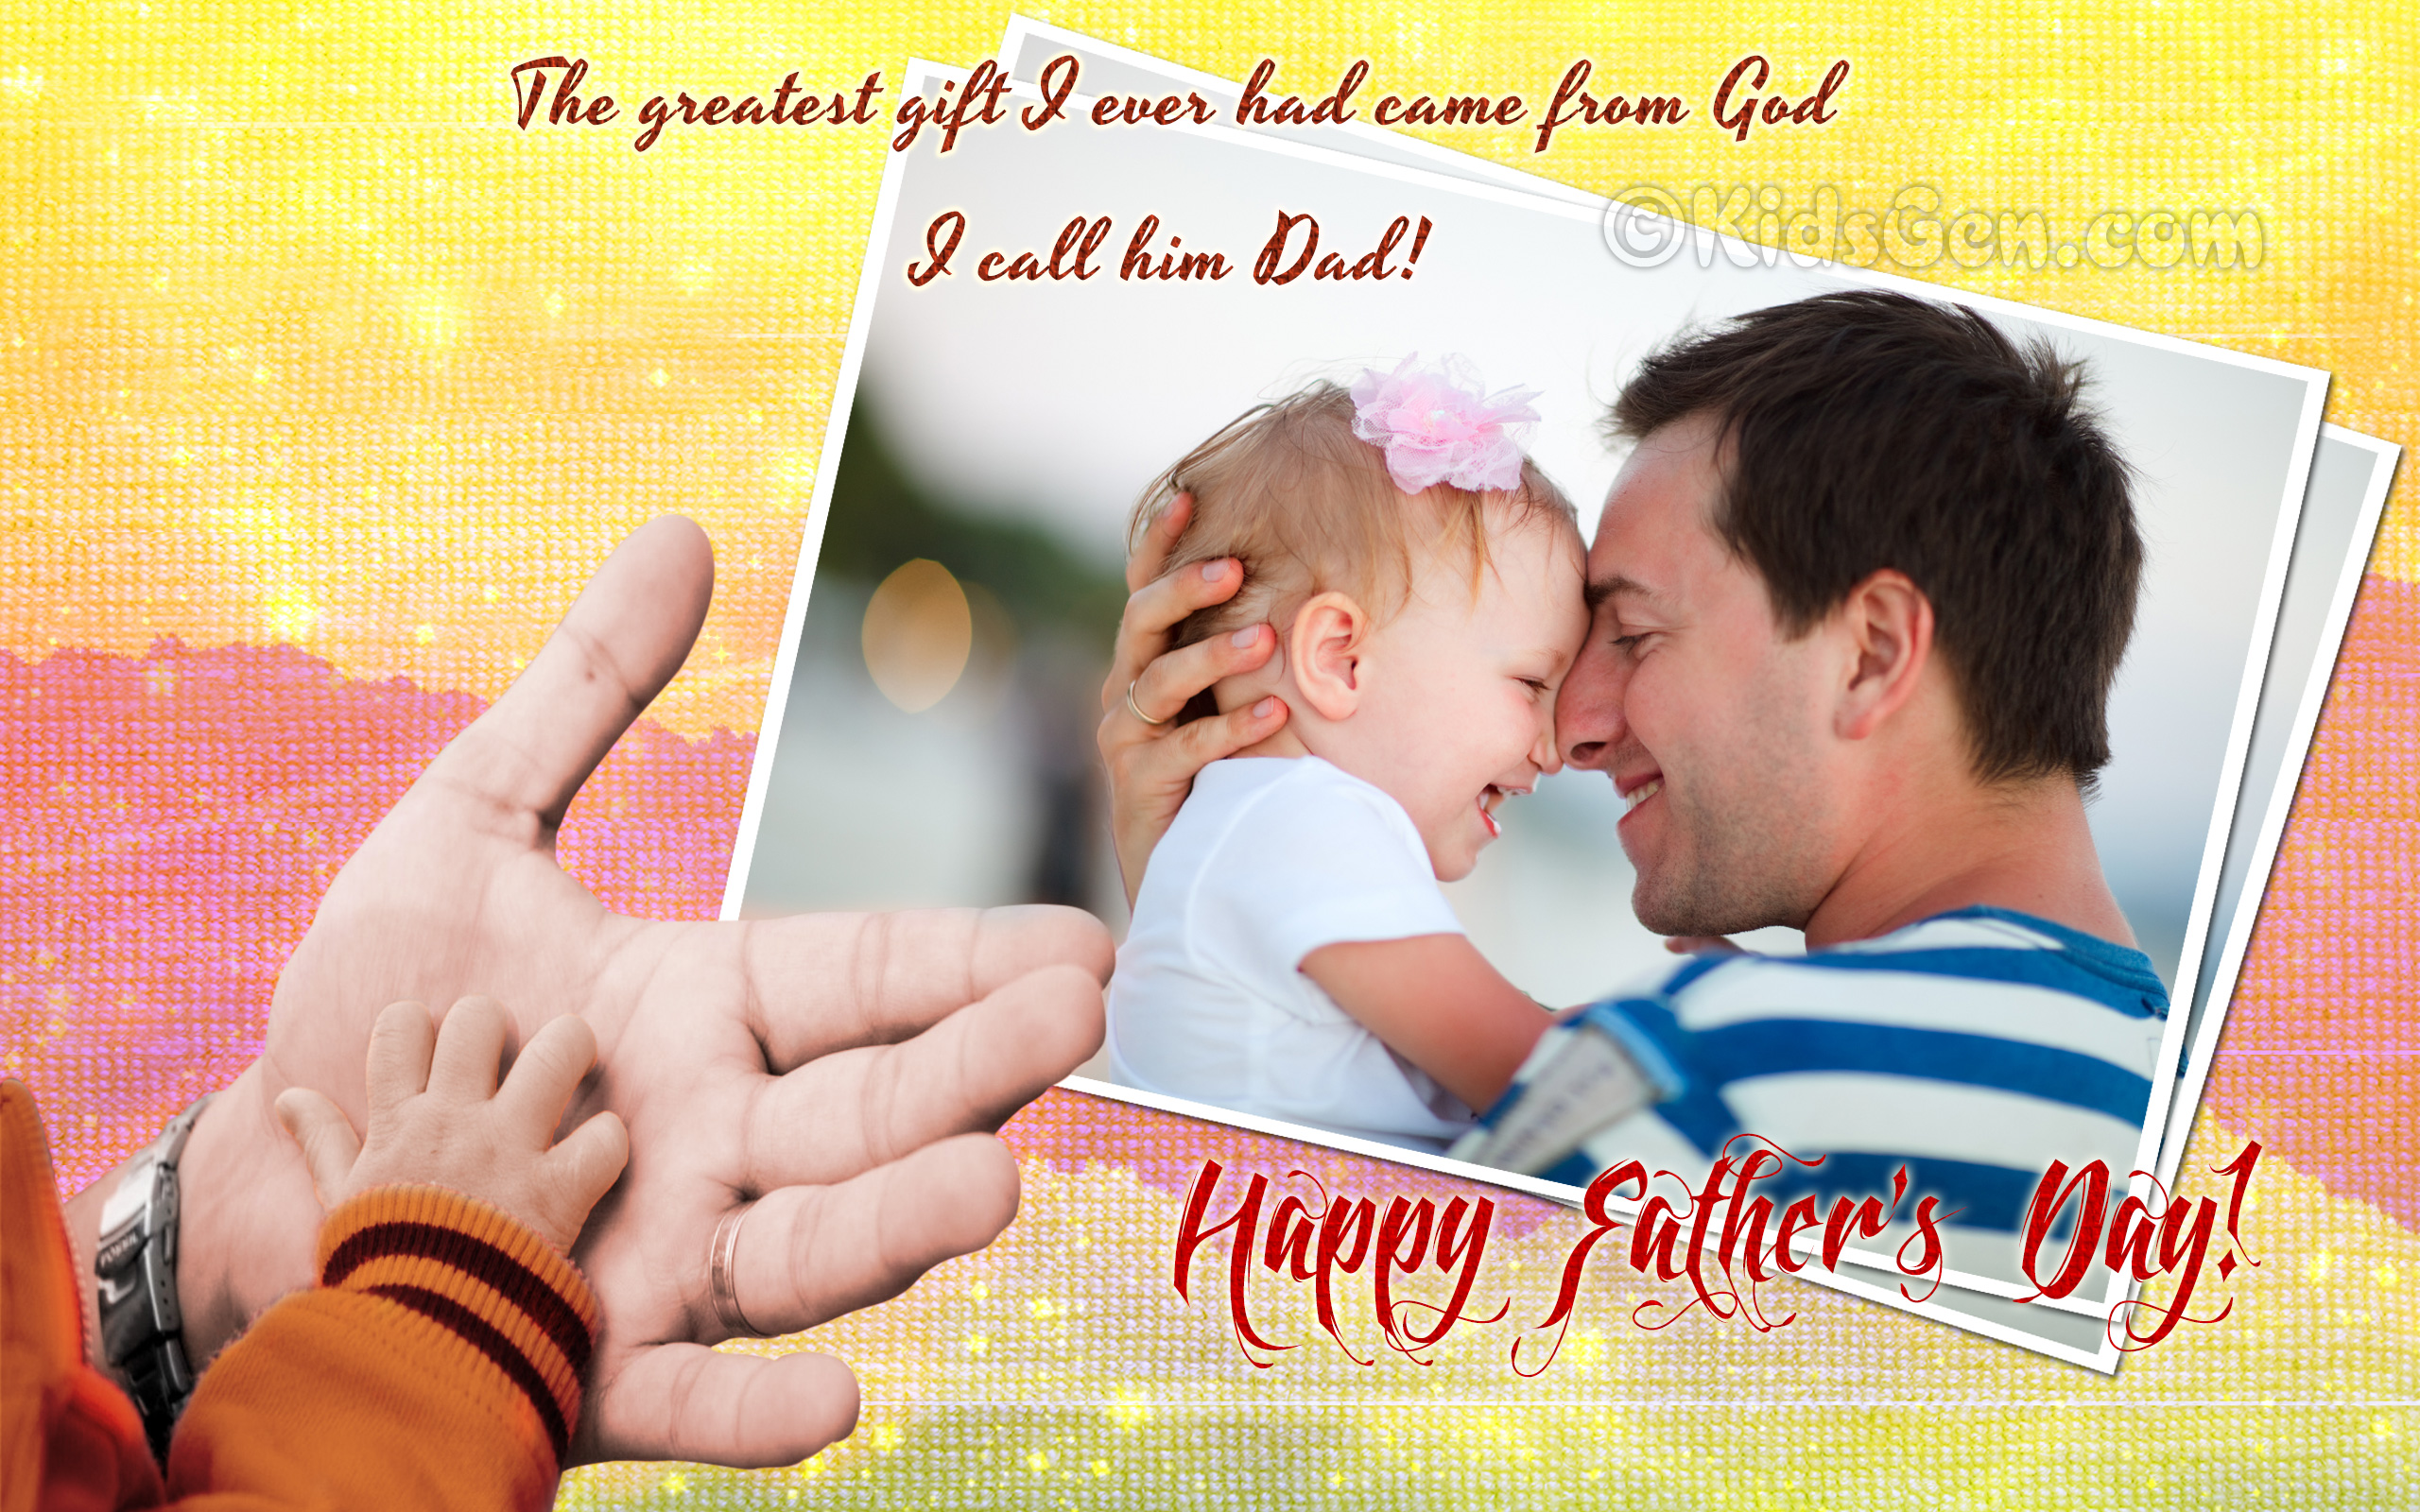 Happy Fathers Day 2022 Images Wallpapers Pictures Photos Pics